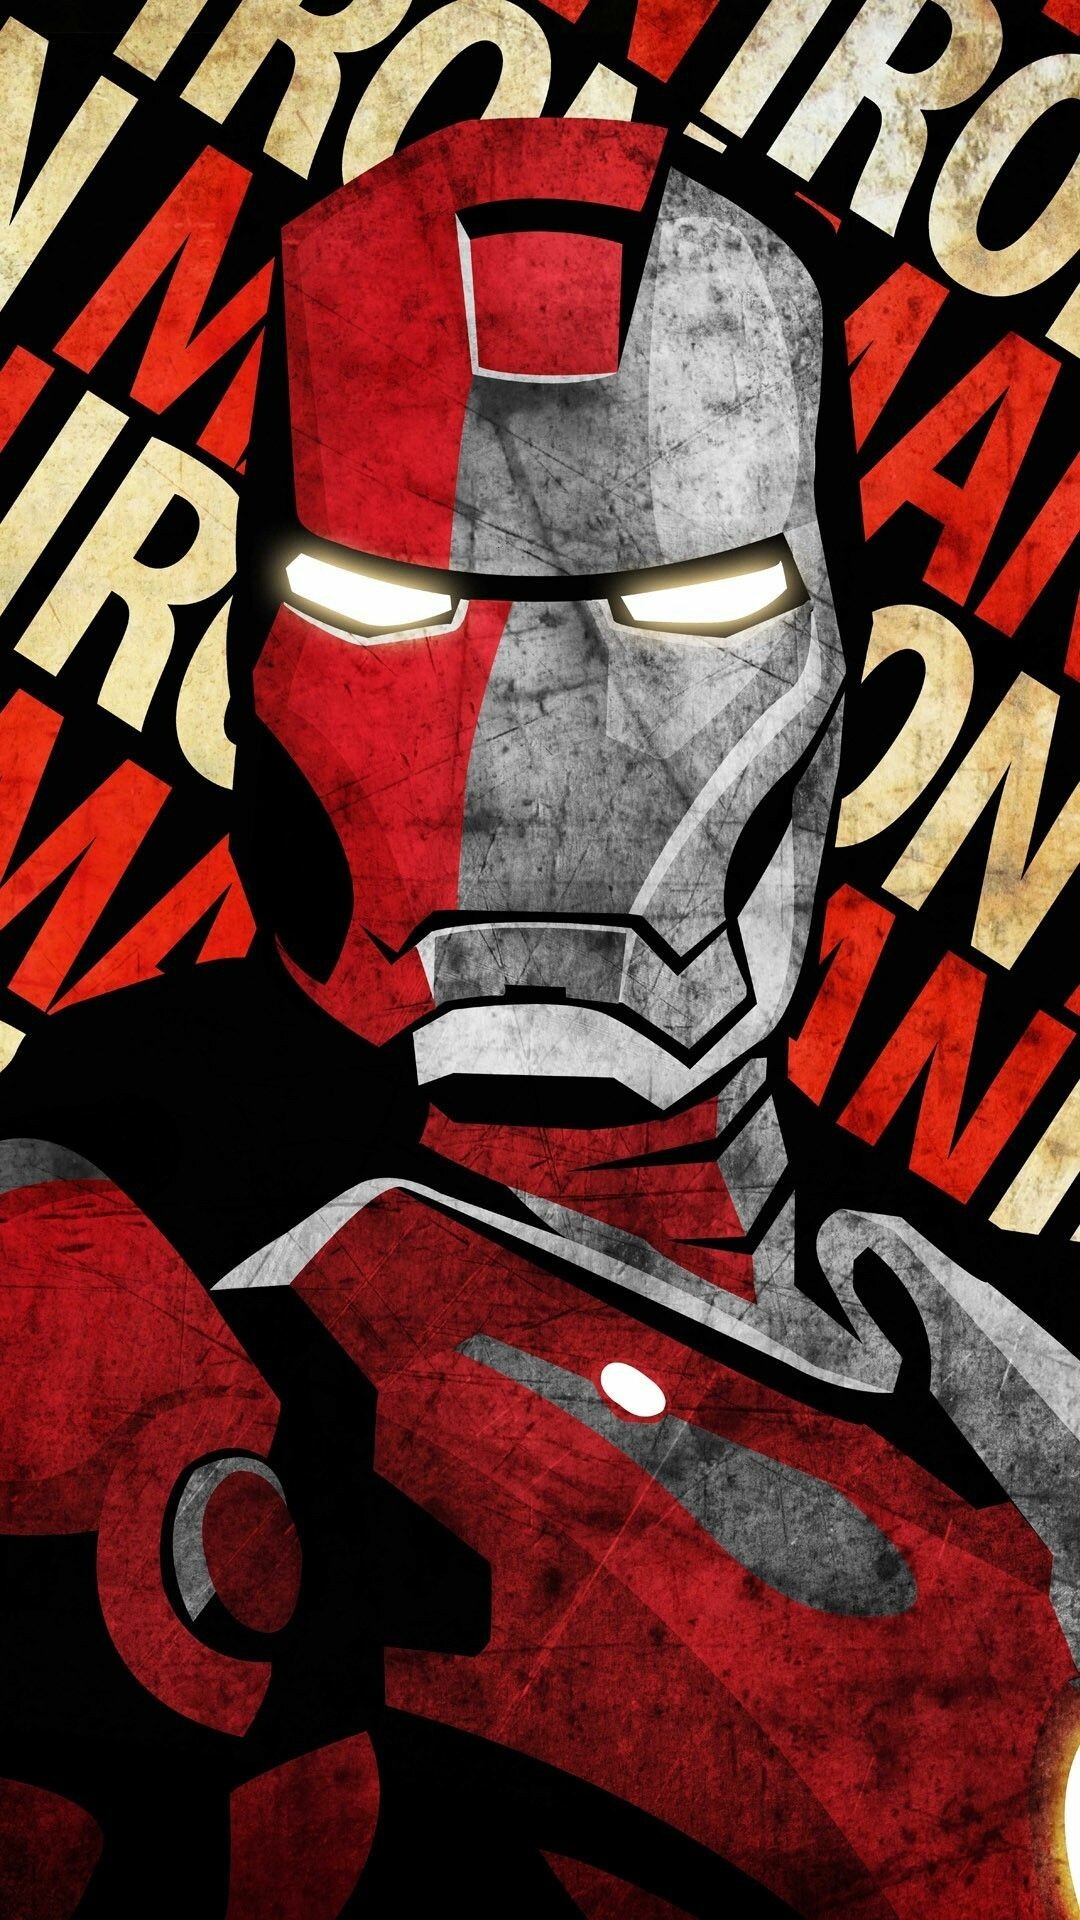 Cool Marvel Wallpapers